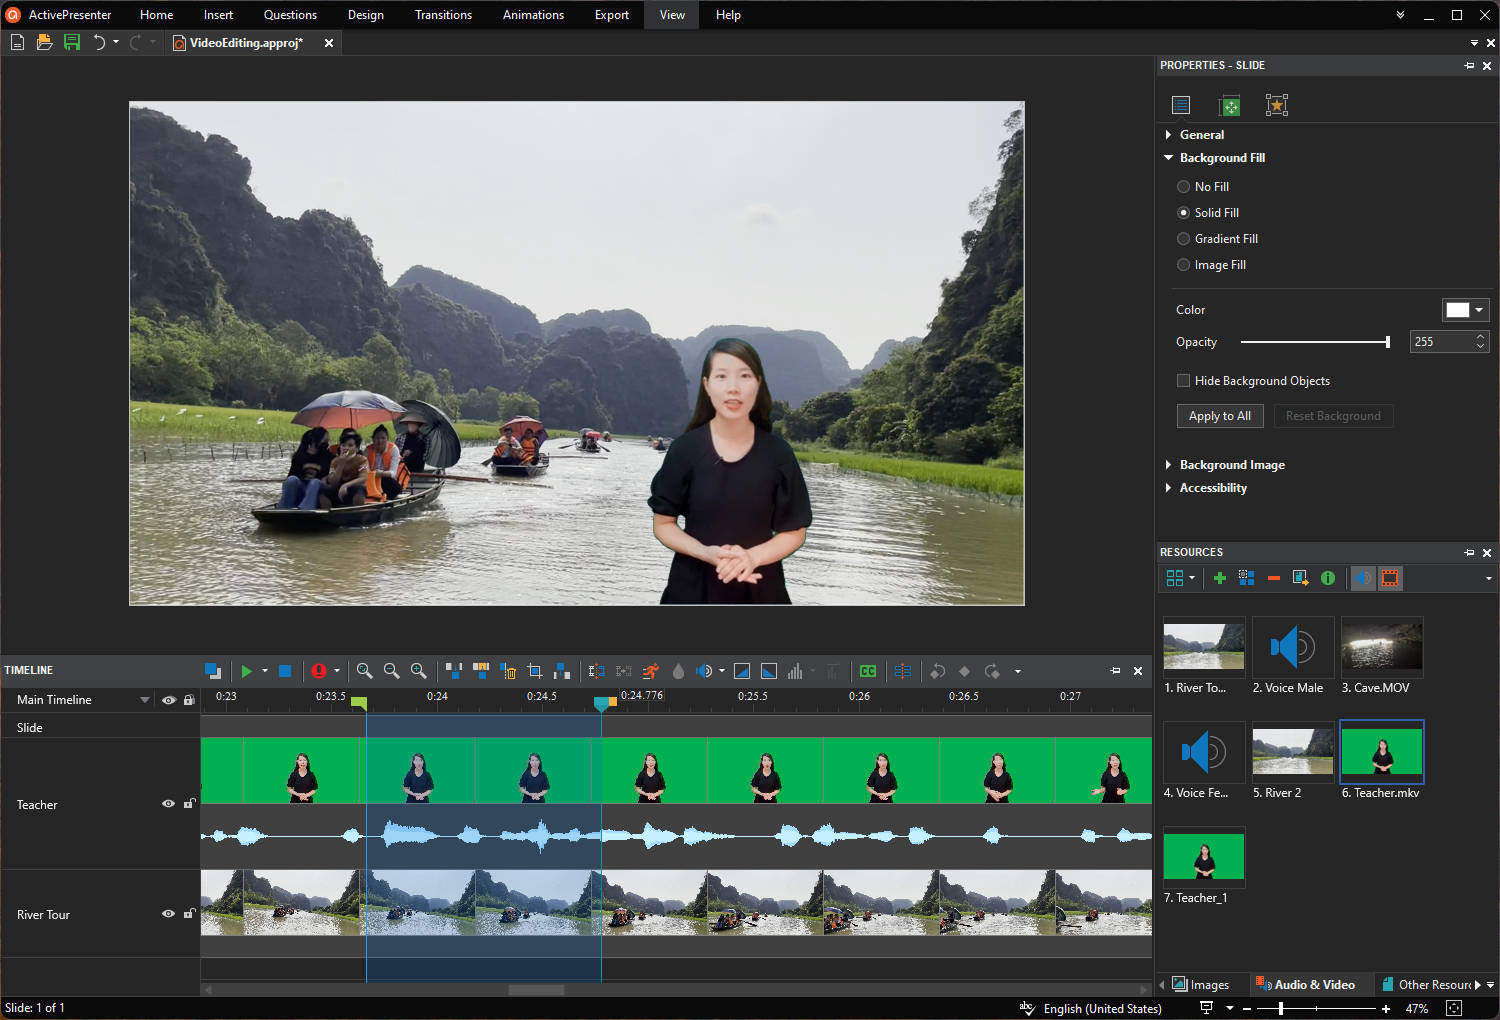 ActivePresenter authoring tool for eLearning allows recording and editing videos effortlessly